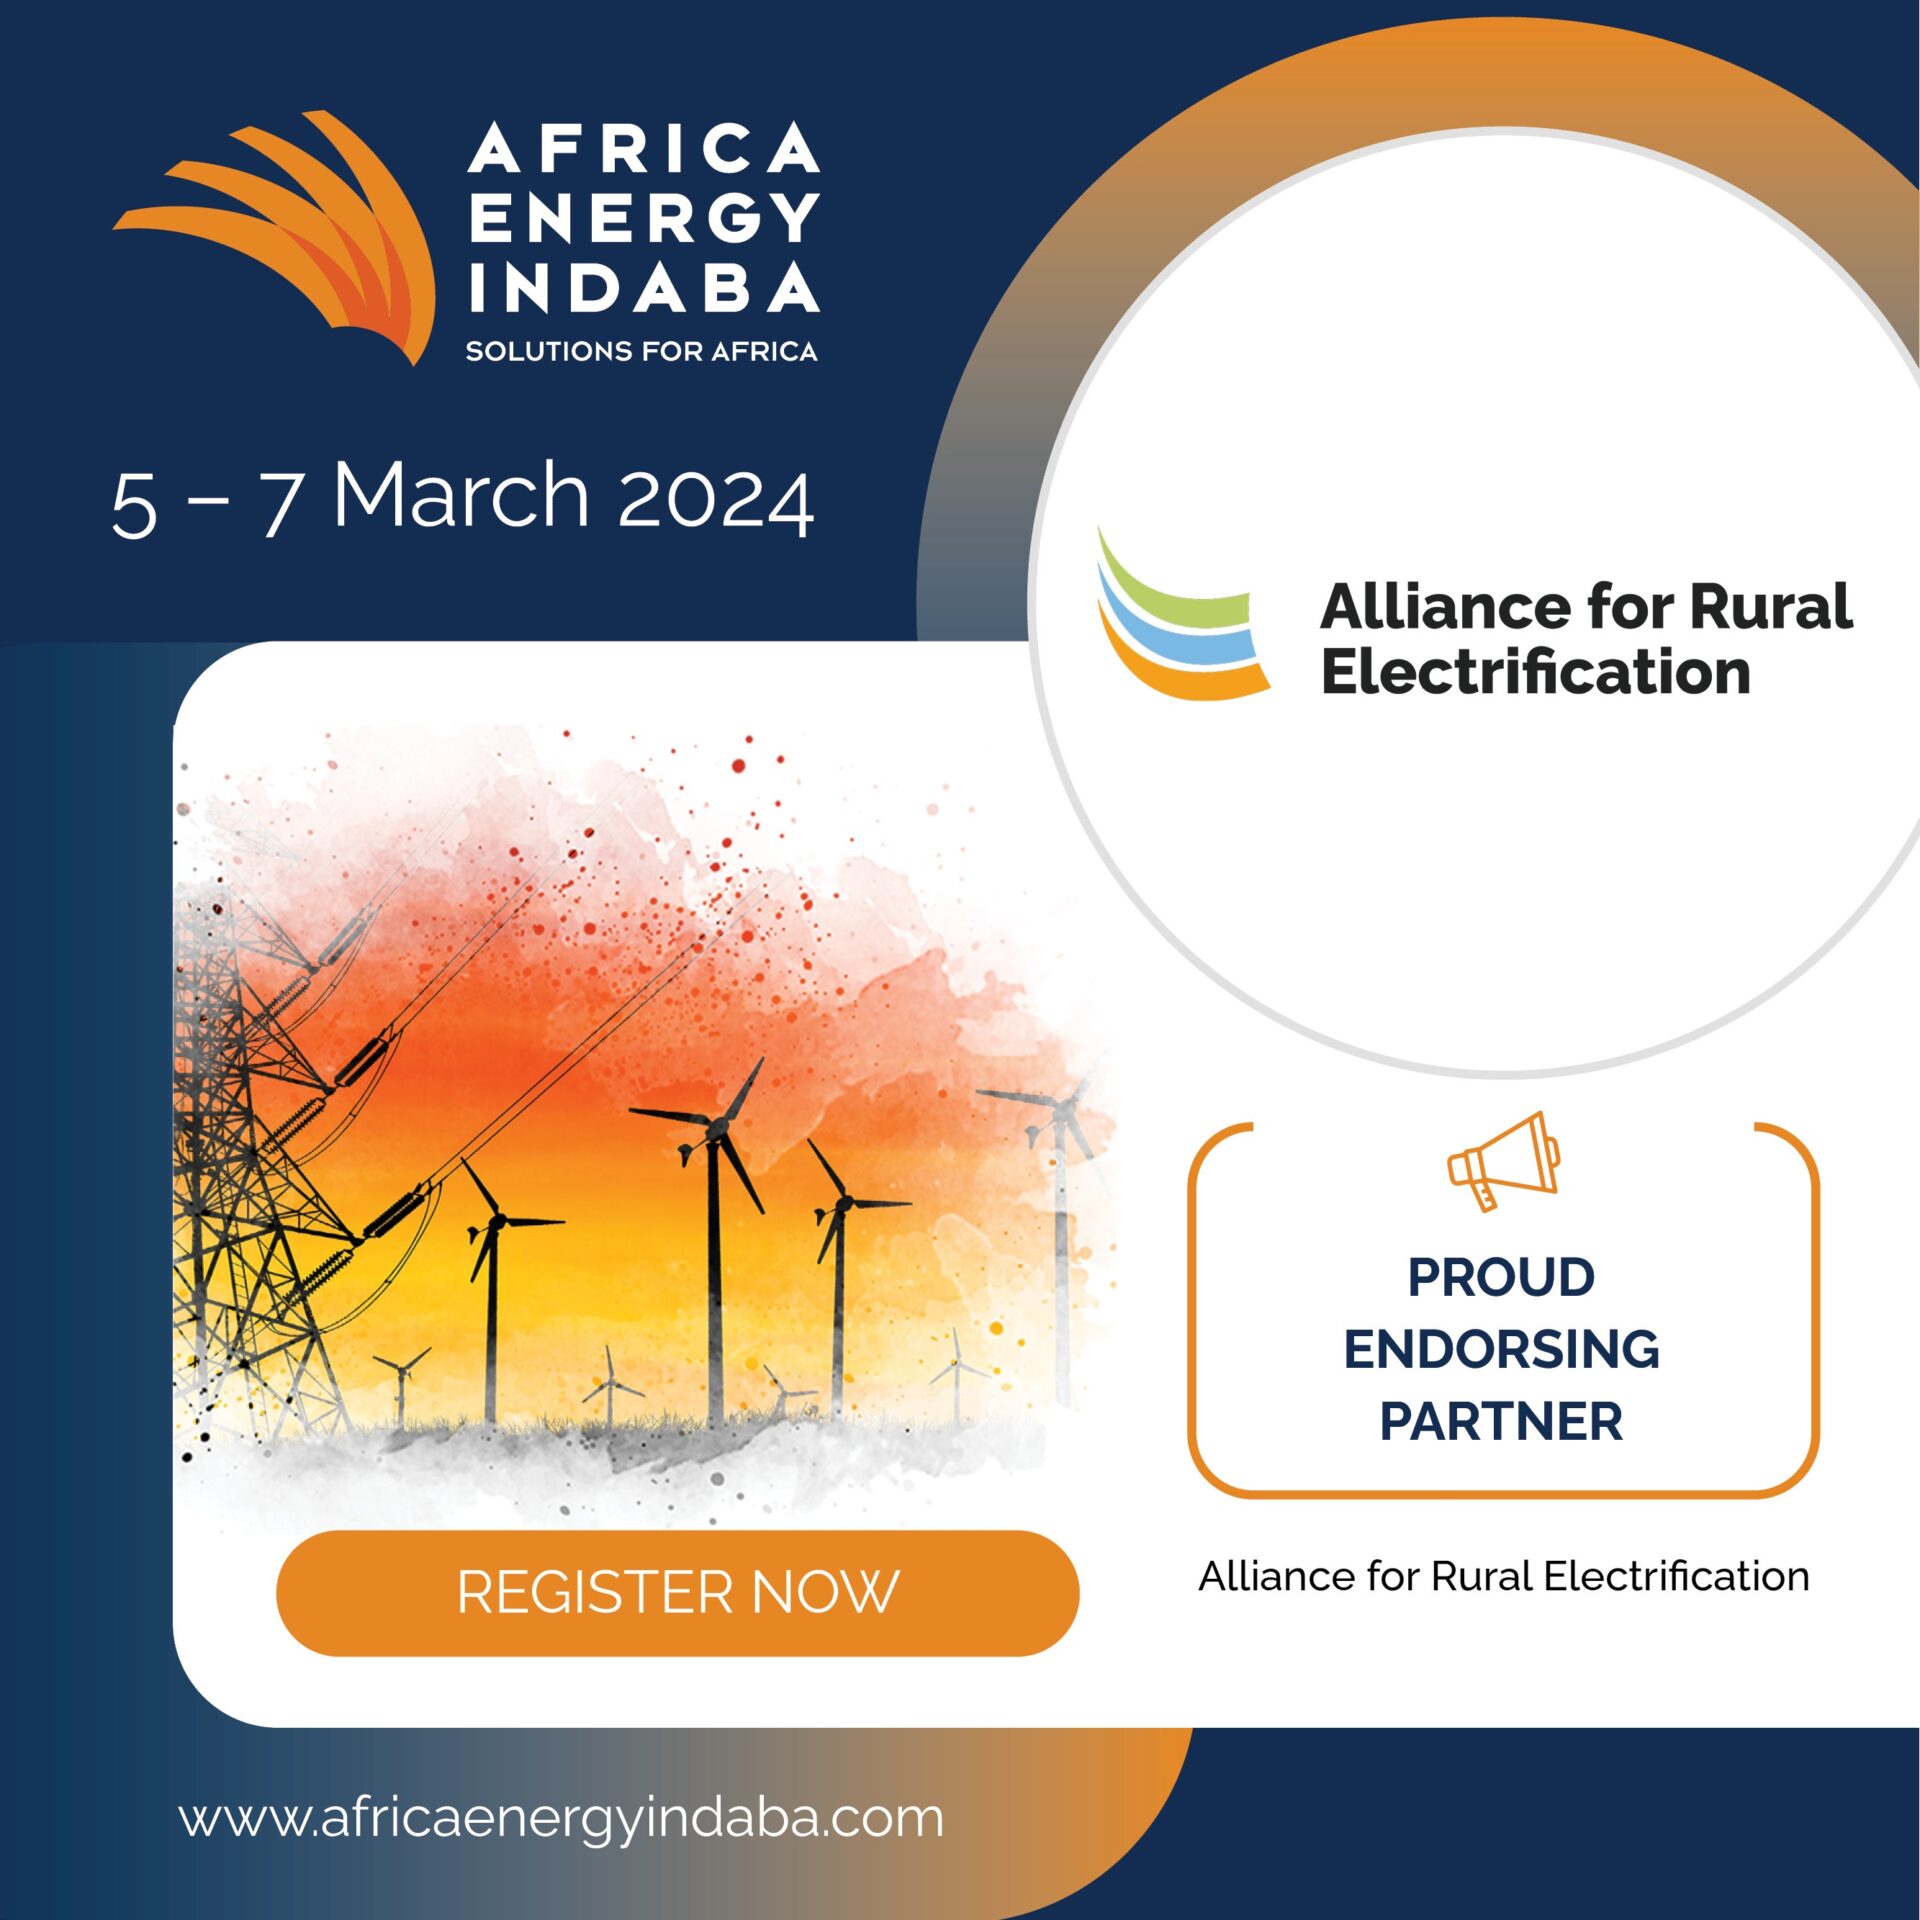 Africa Energy Indaba - The Alliance for Rural Electrification